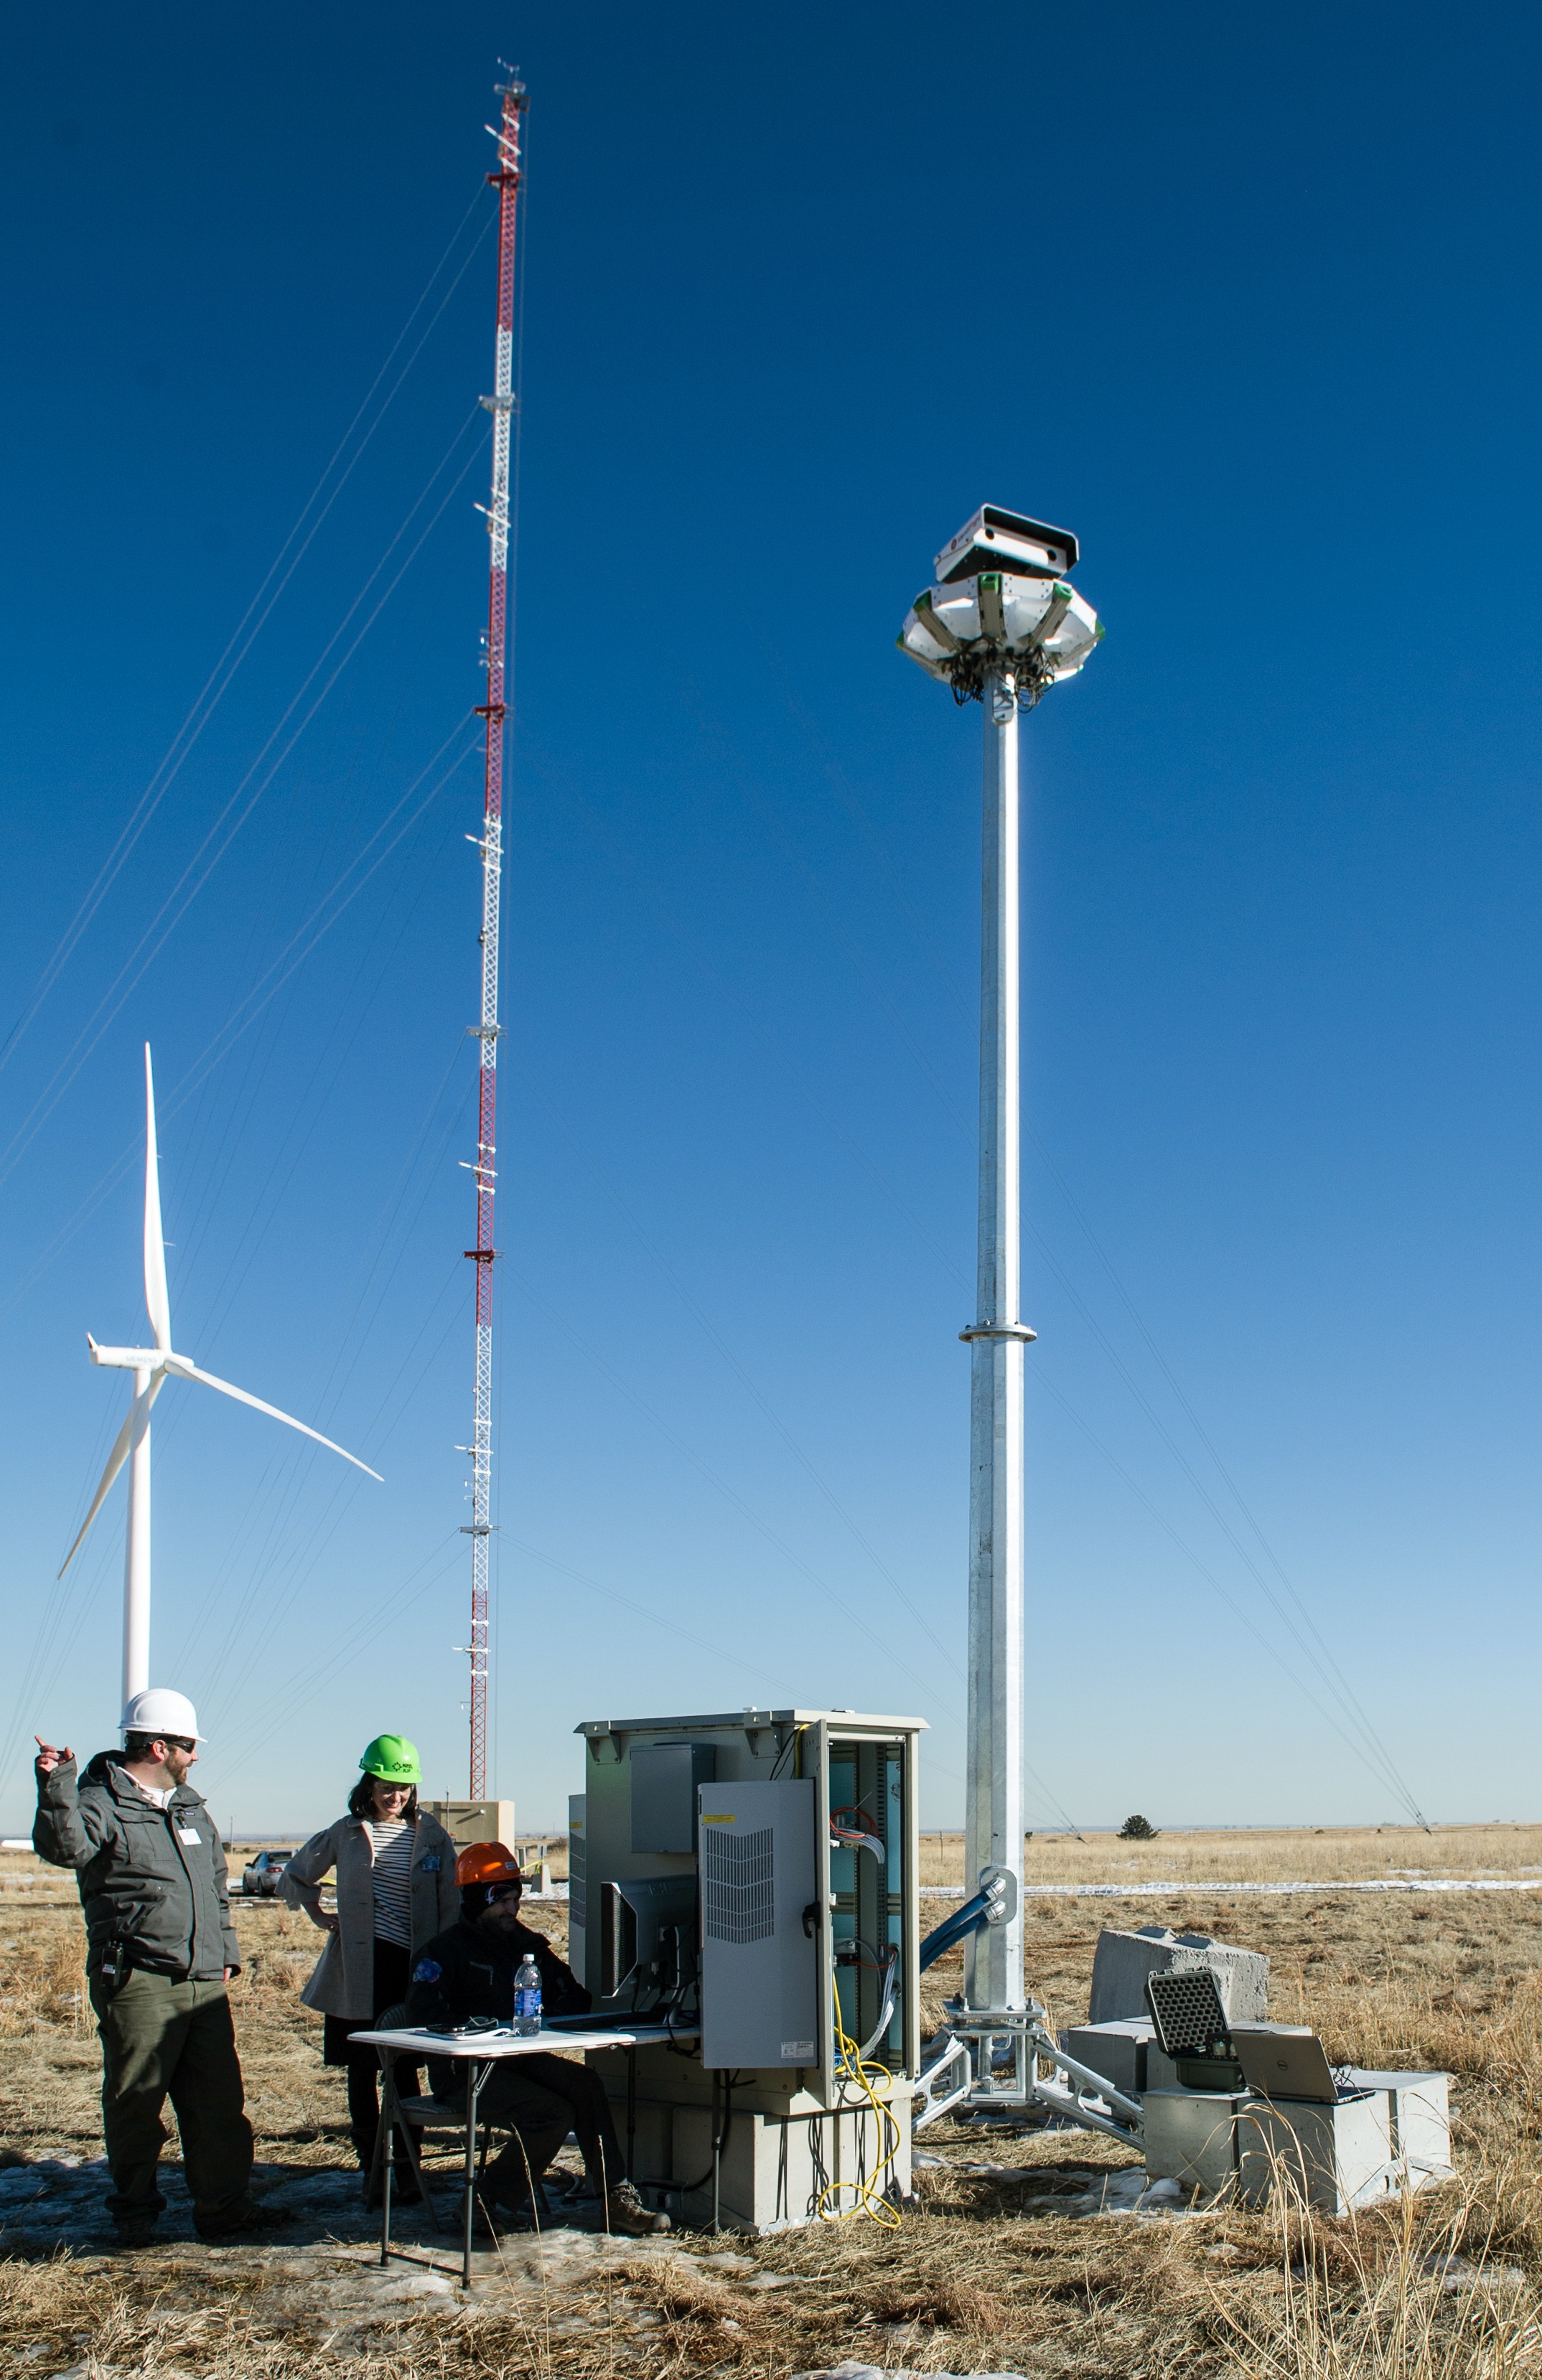 Two people in hard hats standing next to electrical devices on the ground and on a pole with a wind turbine in the background